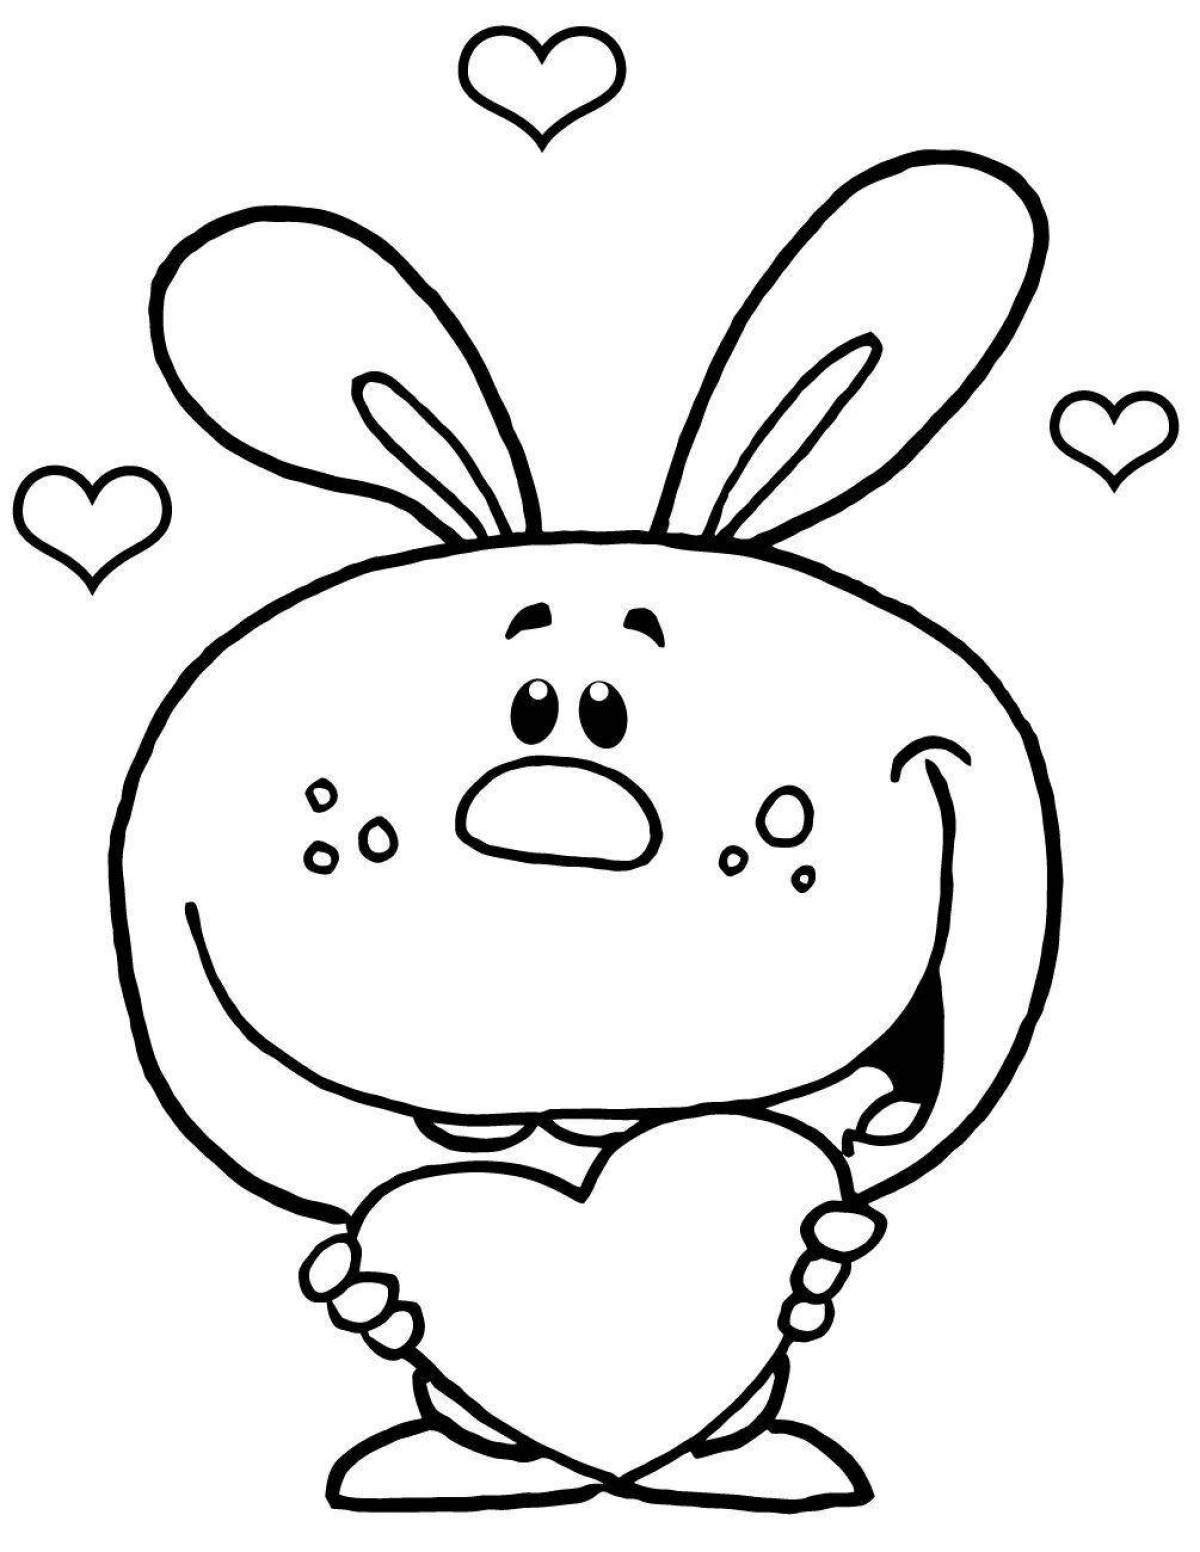 Cute coloring rabbit with a heart